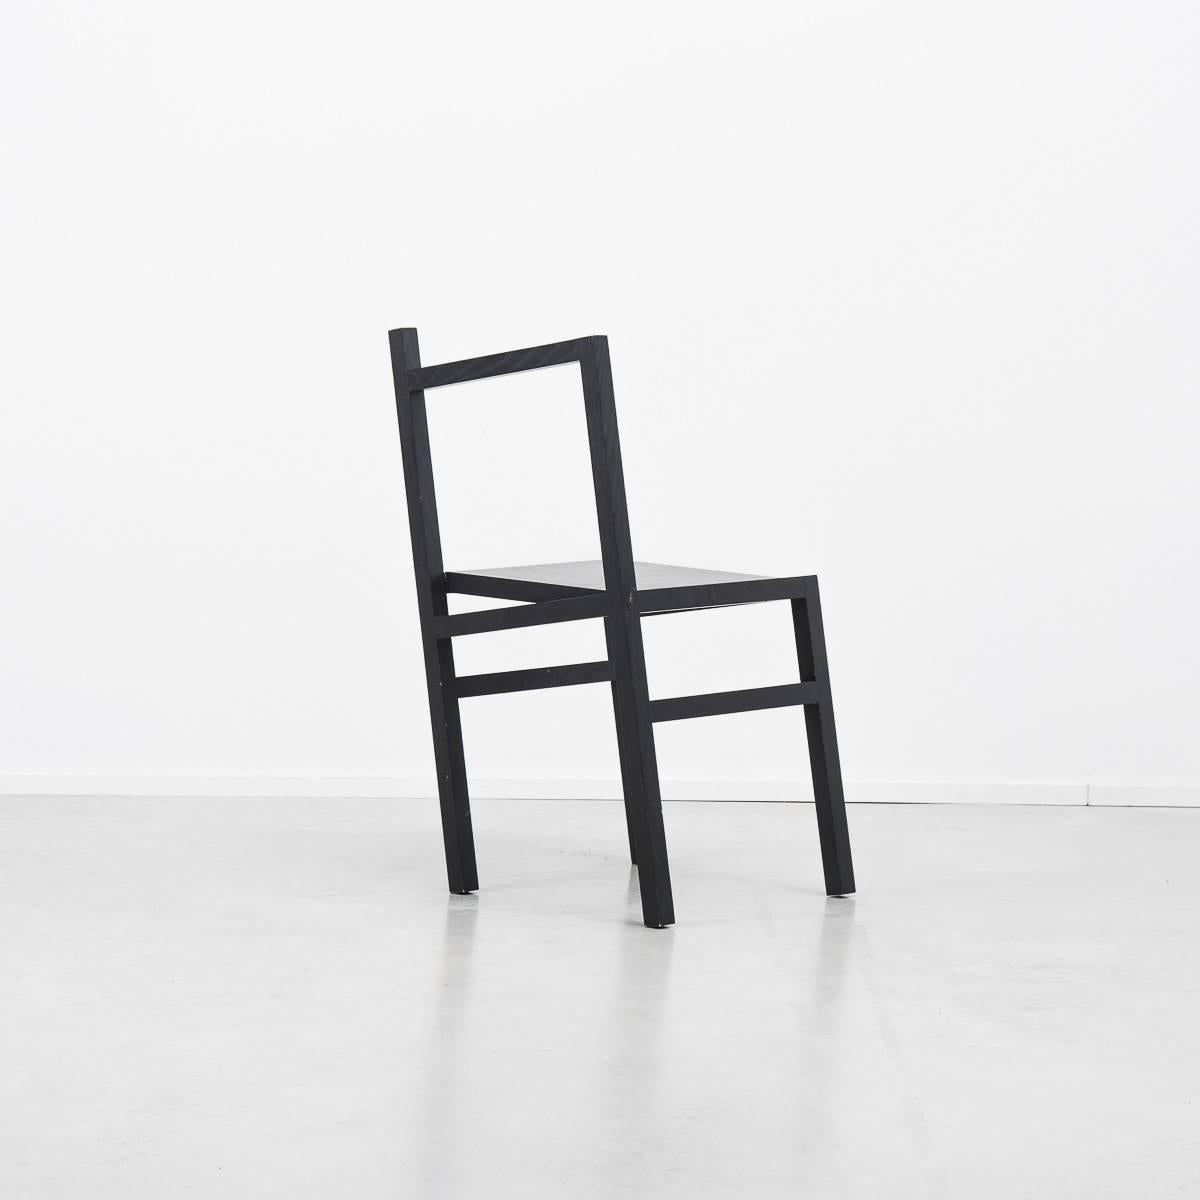 This sculptural chair by Danish designer Rasmus B Fex for Frama was designed to explore notions of right and wrong in design. Using the characteristics of an archetypal chair framework, Fex lifted one corner higher by nine degrees. This creates an